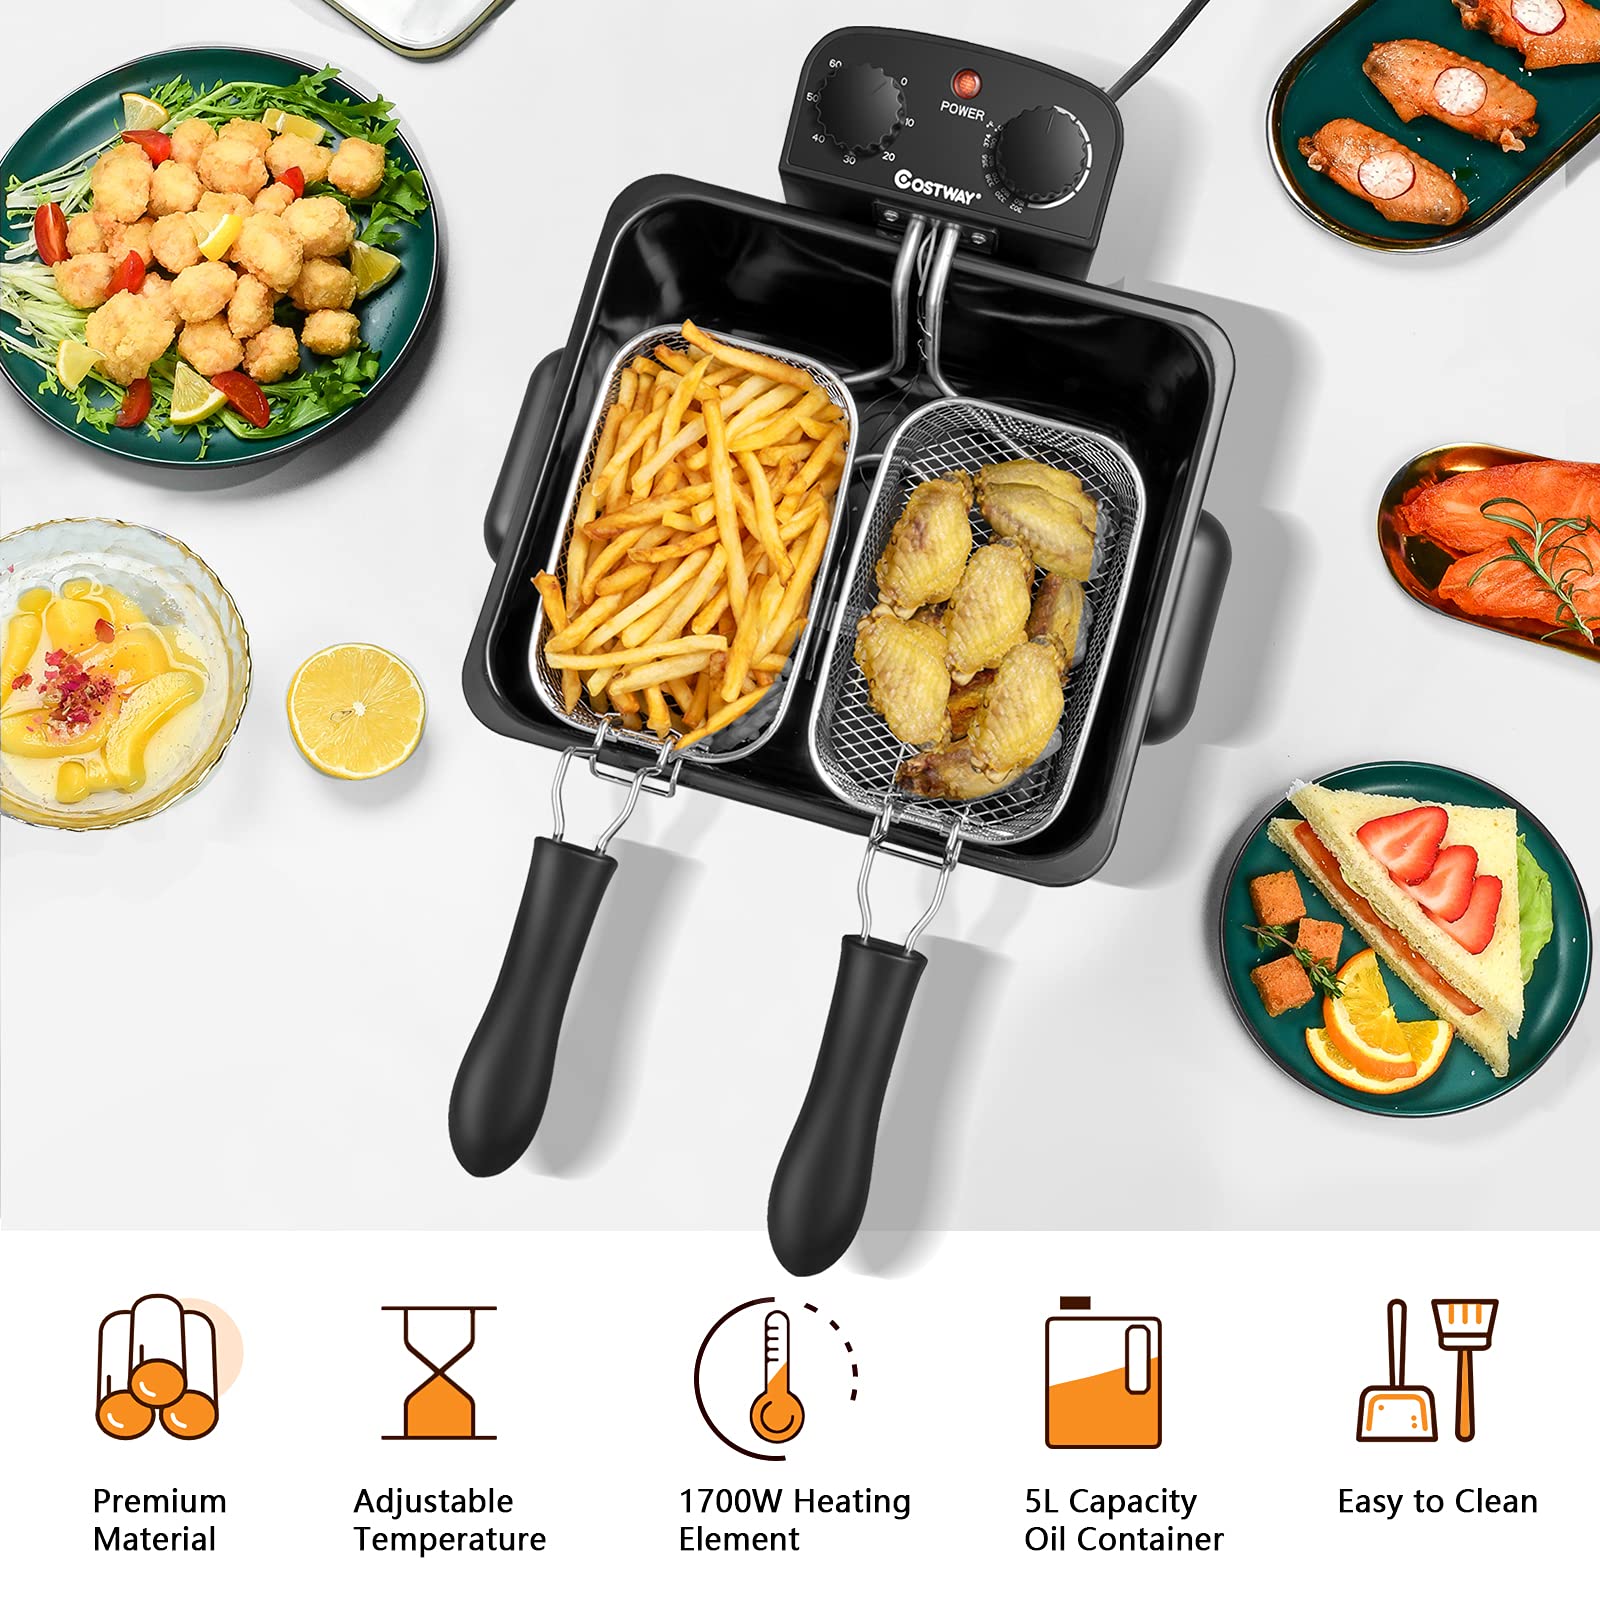 COSTWAY Deep Fryer with Basket, 5.3Qt Stainless Steel Electric Oil Fryer w/Adjustable Temperature, Timer, Lid with View Window, Professional Style, Deep Fryer Pot for Home Use, French Fries, Chicken